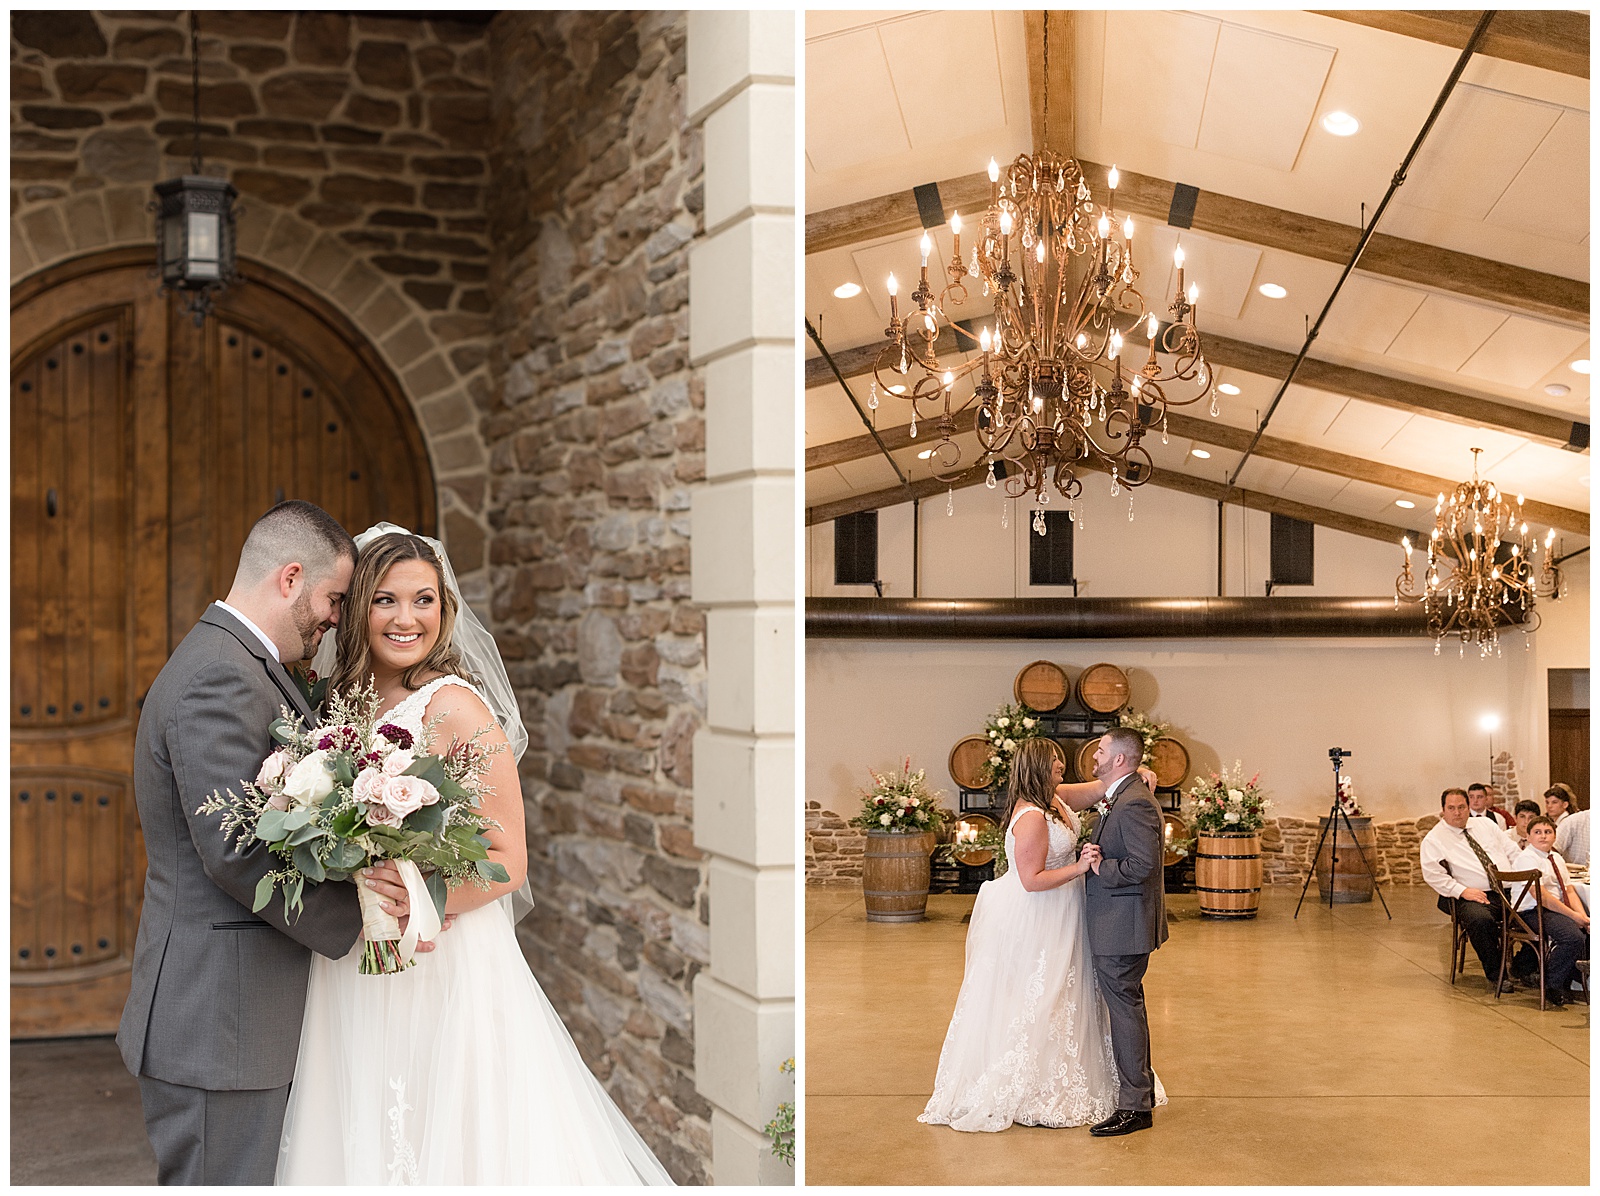 bride and groom sharing their first dance during reception inside lovely barn venue with exposed wooden beams on the ceiling and gorgeous chandelier above them